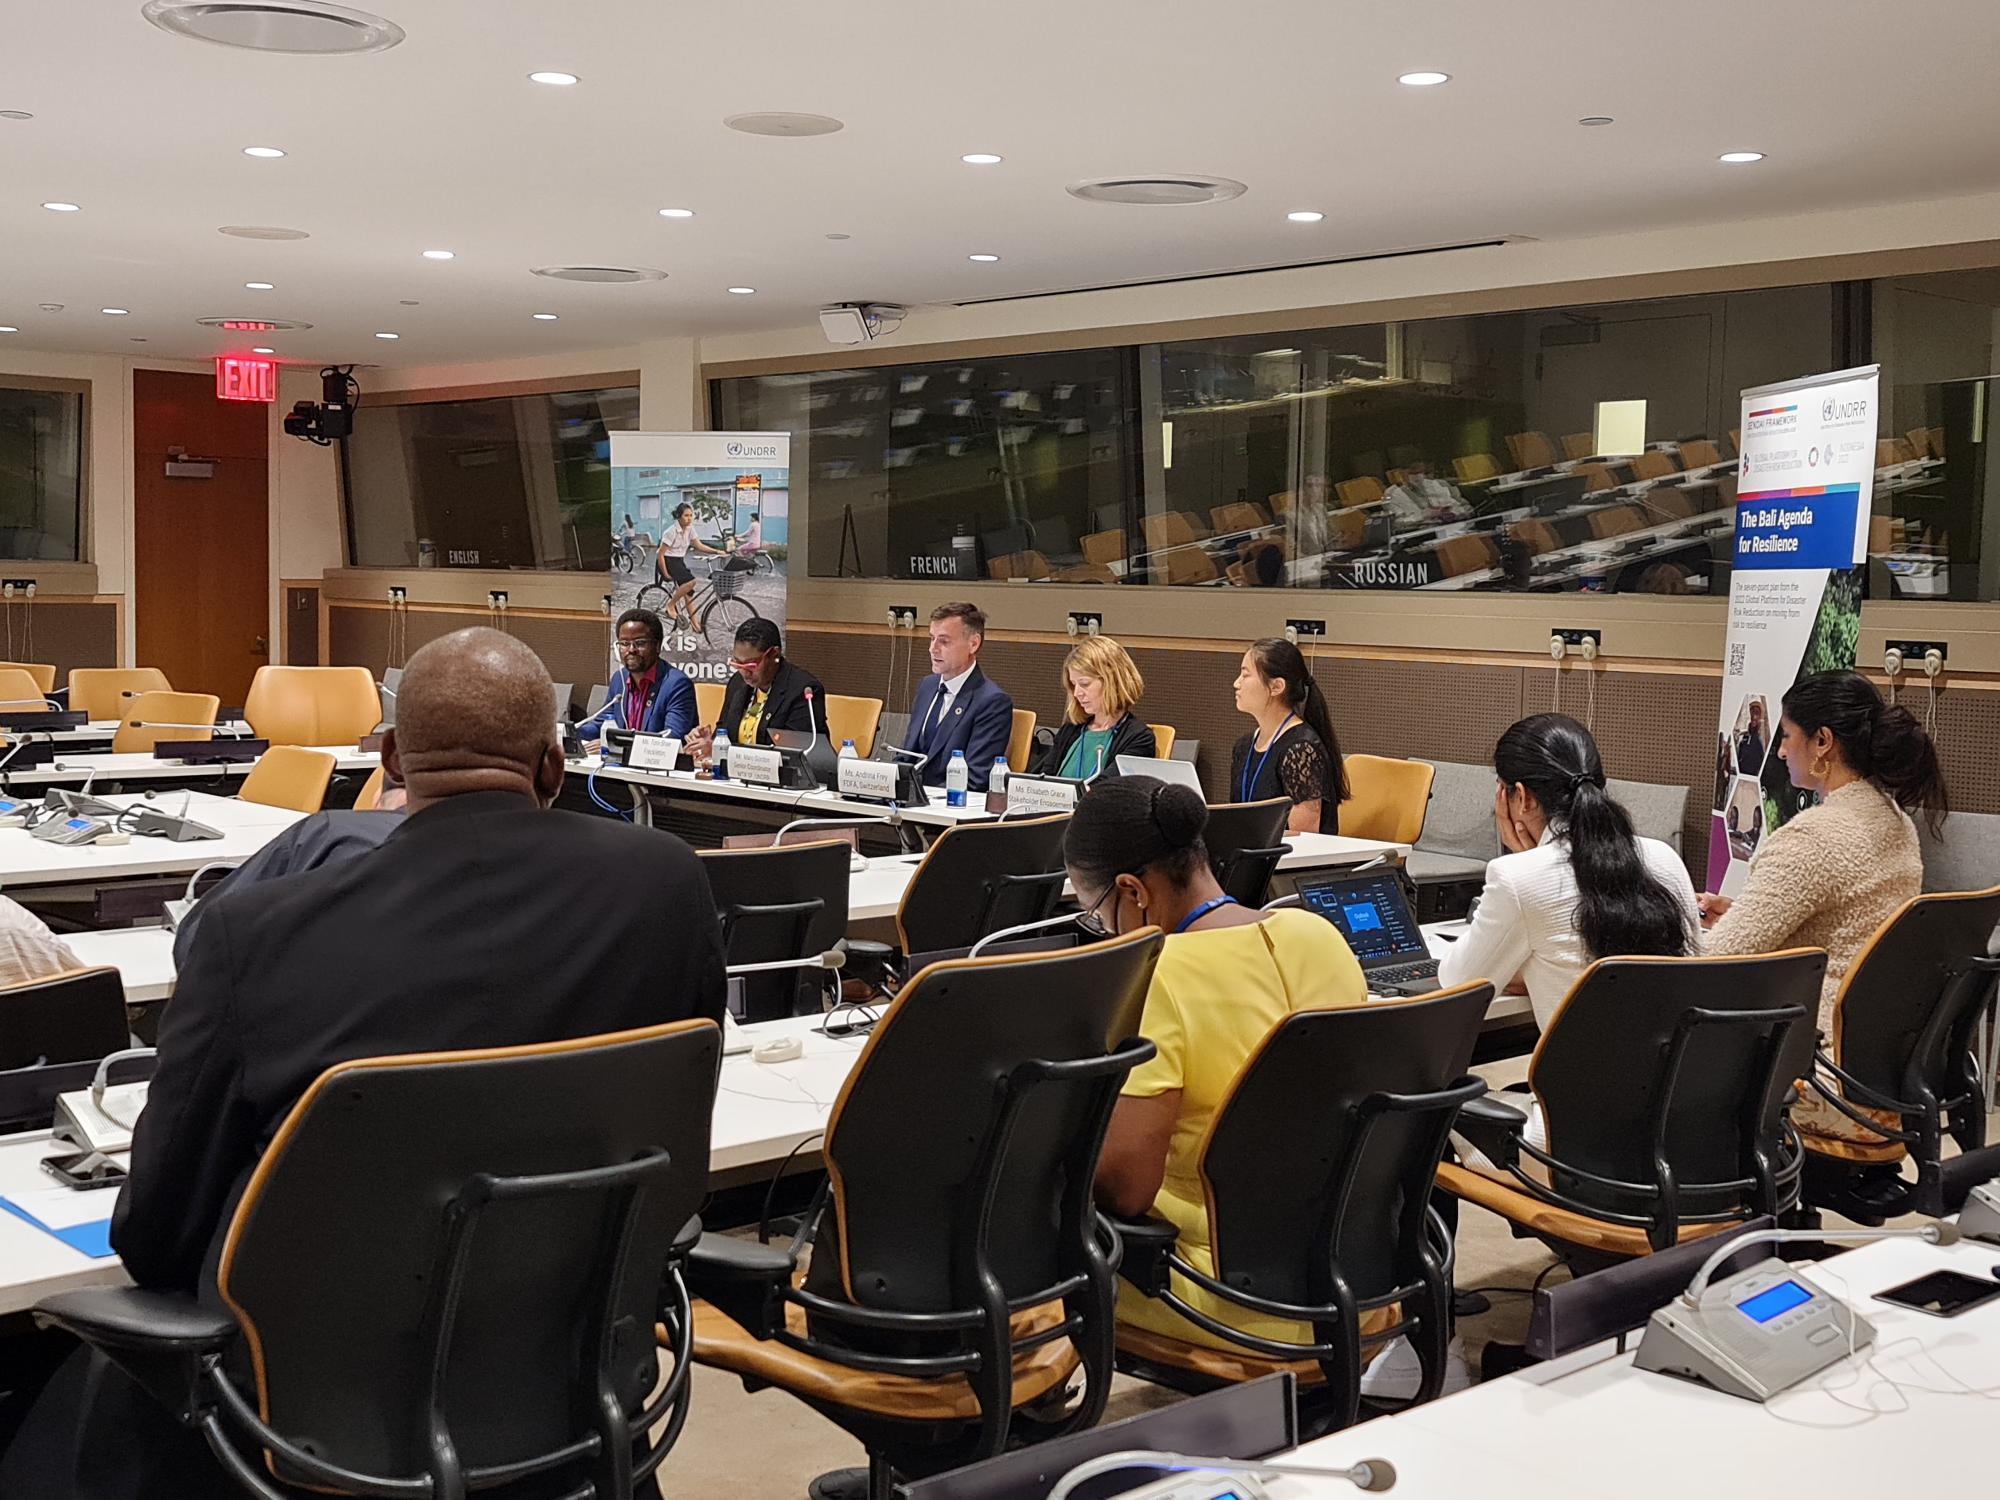 A moment from the HLPF 2022 event